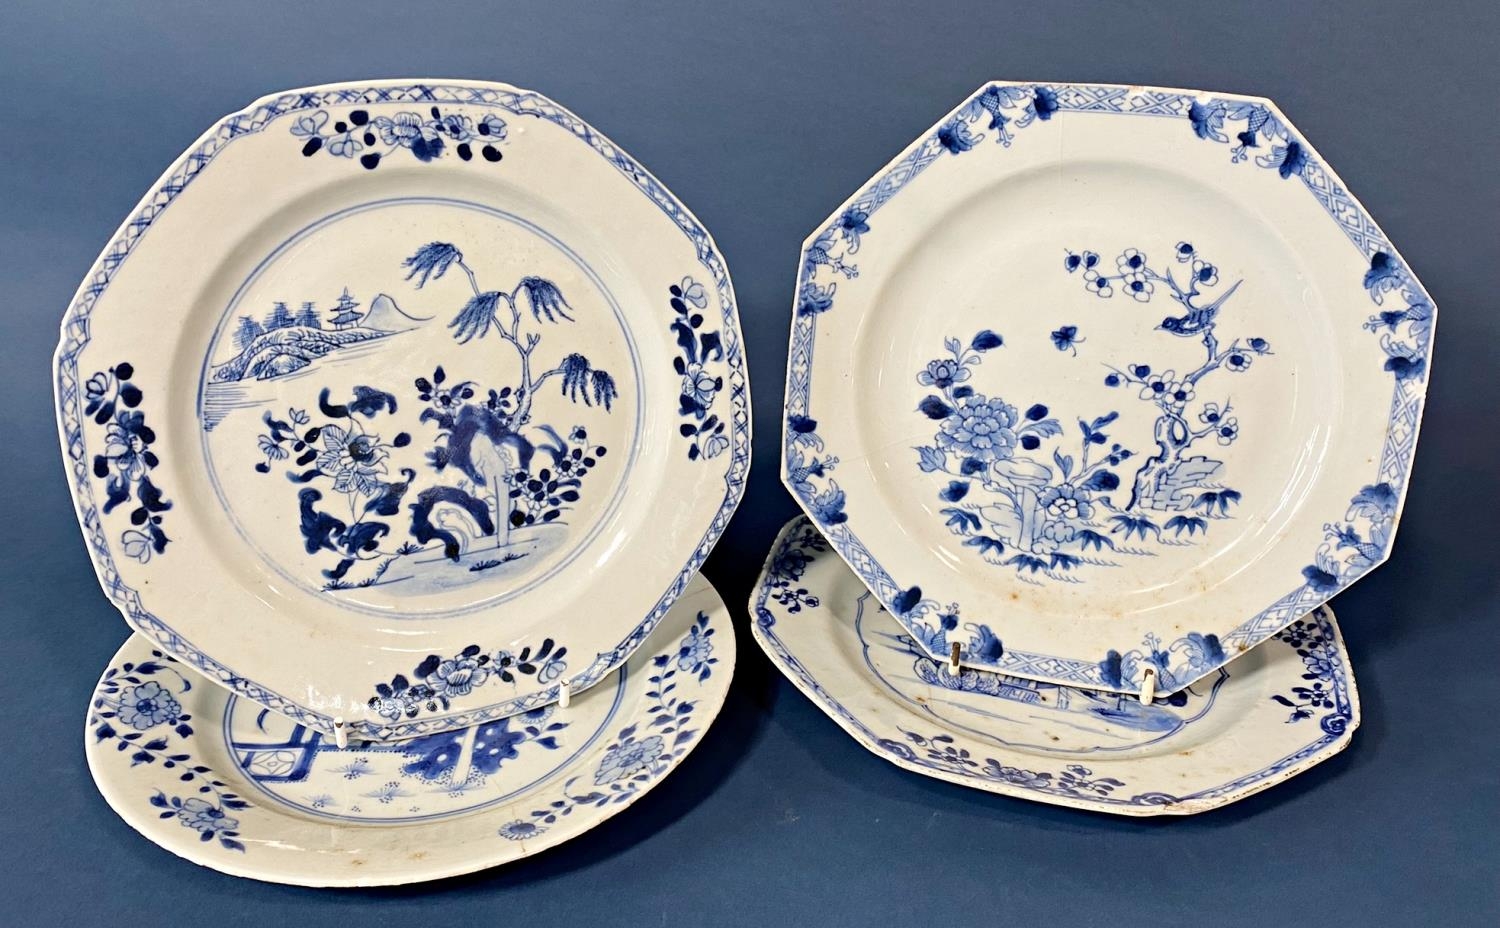 Four 18th Century Chinese blue and white porcelain dishes, with floral decorations depicting